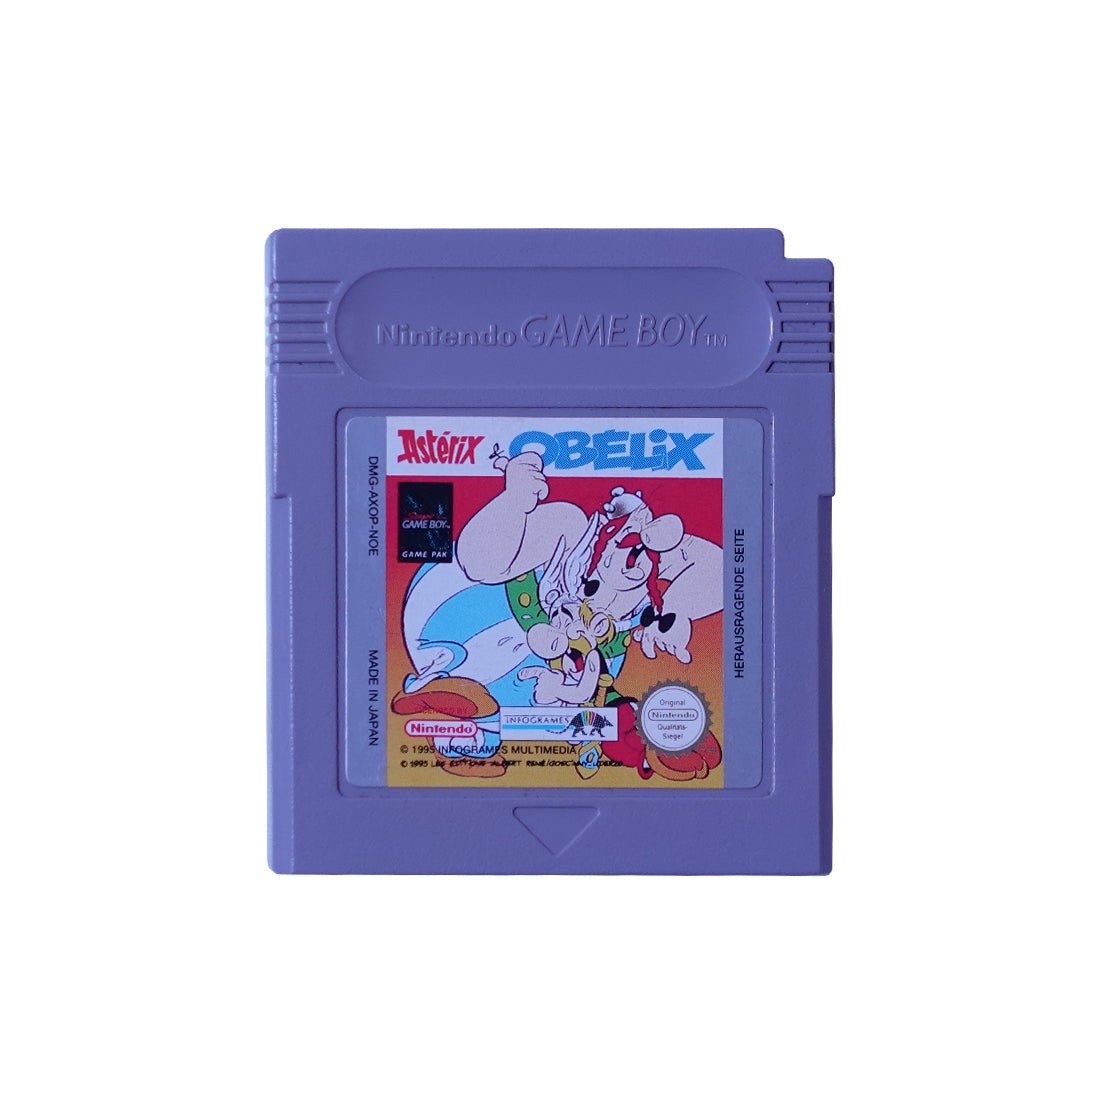 (Pre-Owned) Asterix & Obelix - Gameboy Classic - ريترو - Store 974 | ستور ٩٧٤